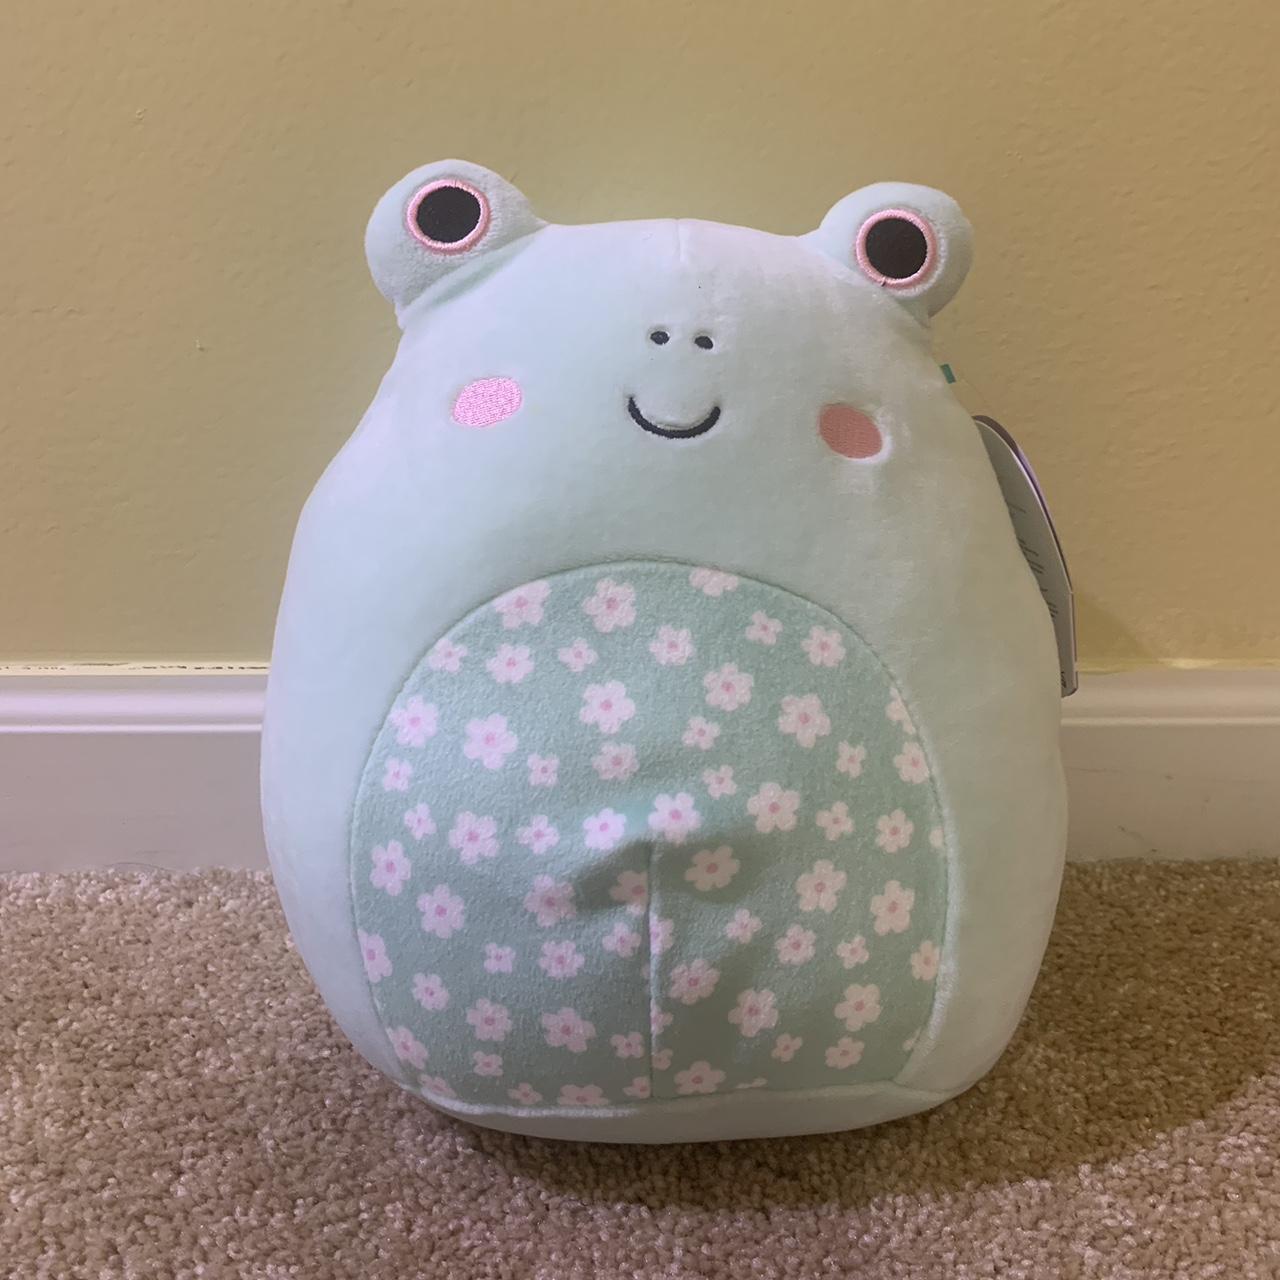 Fritz the Easter Flower Frog Squishmallow !!!, They